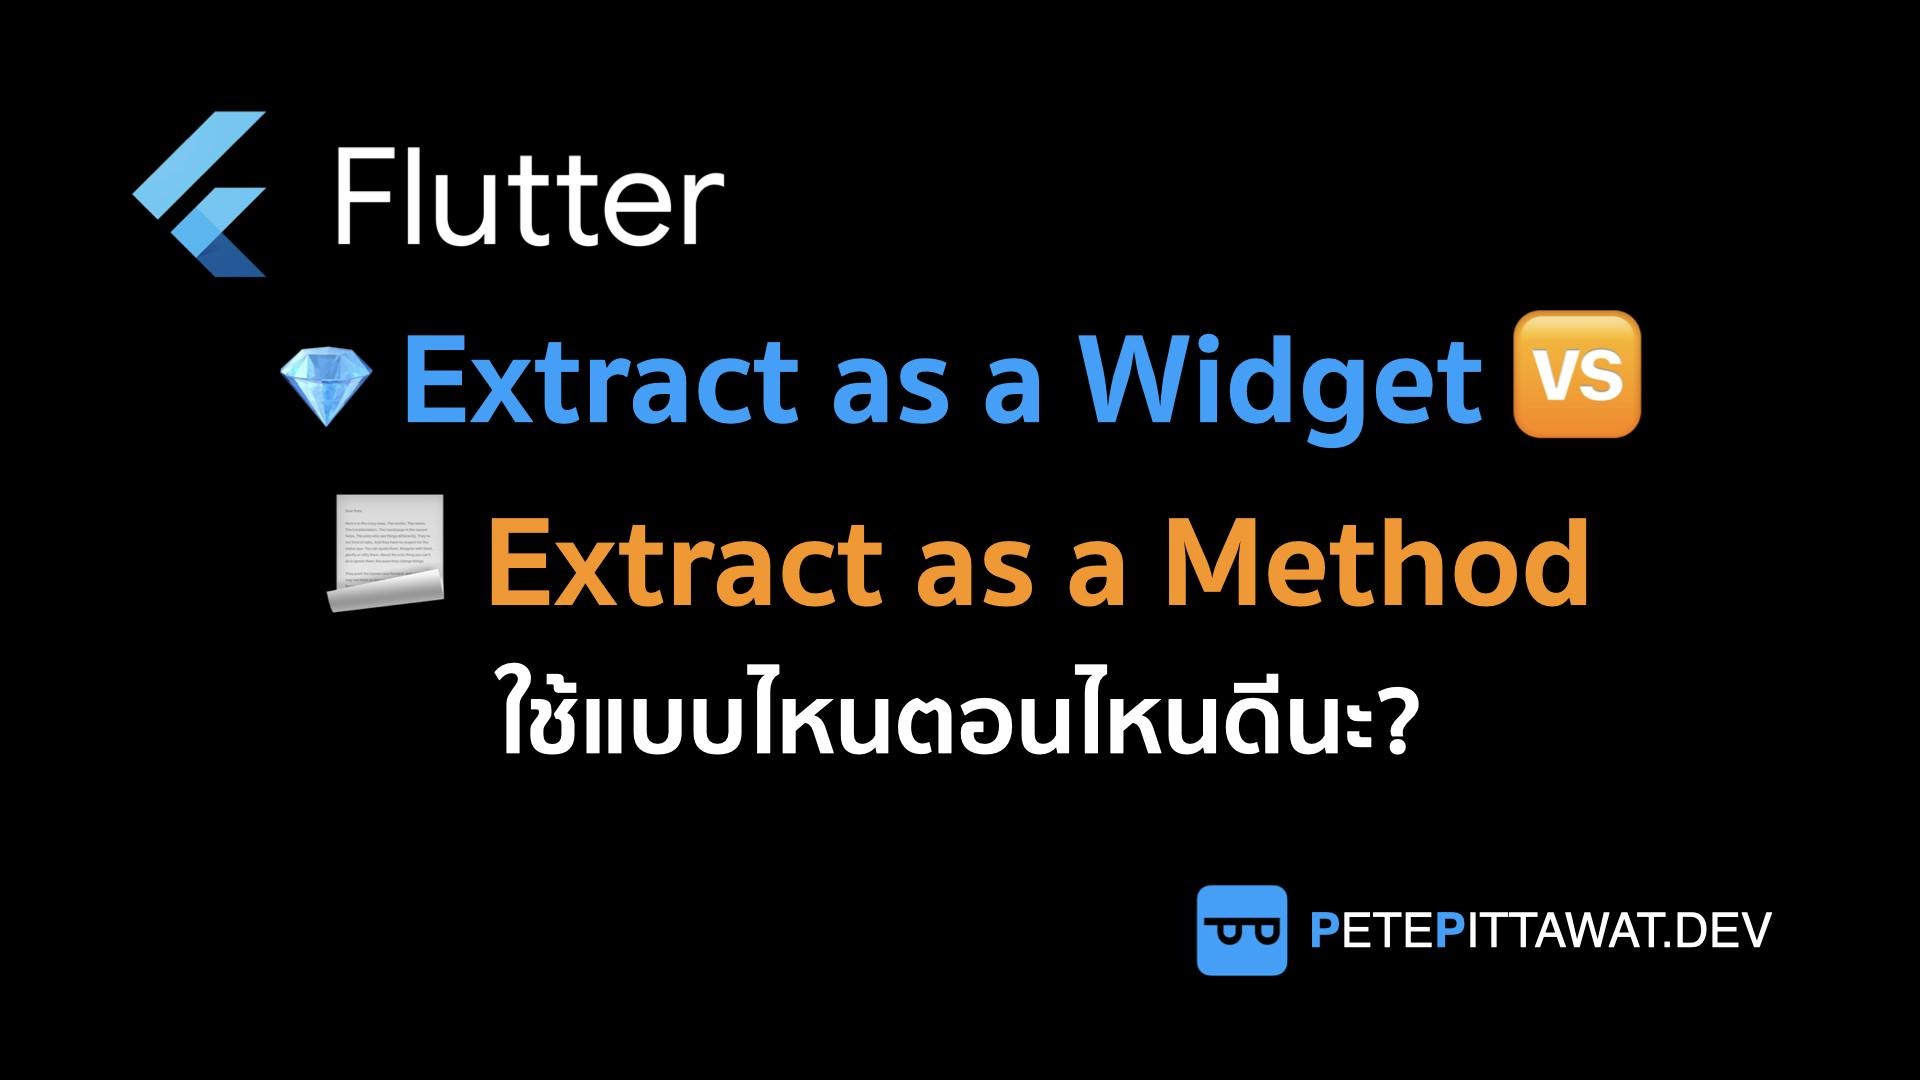 Cover Image for Flutter: Extract as a Widget VS Extract as a Method ใช้แบบไหนดีนะ?